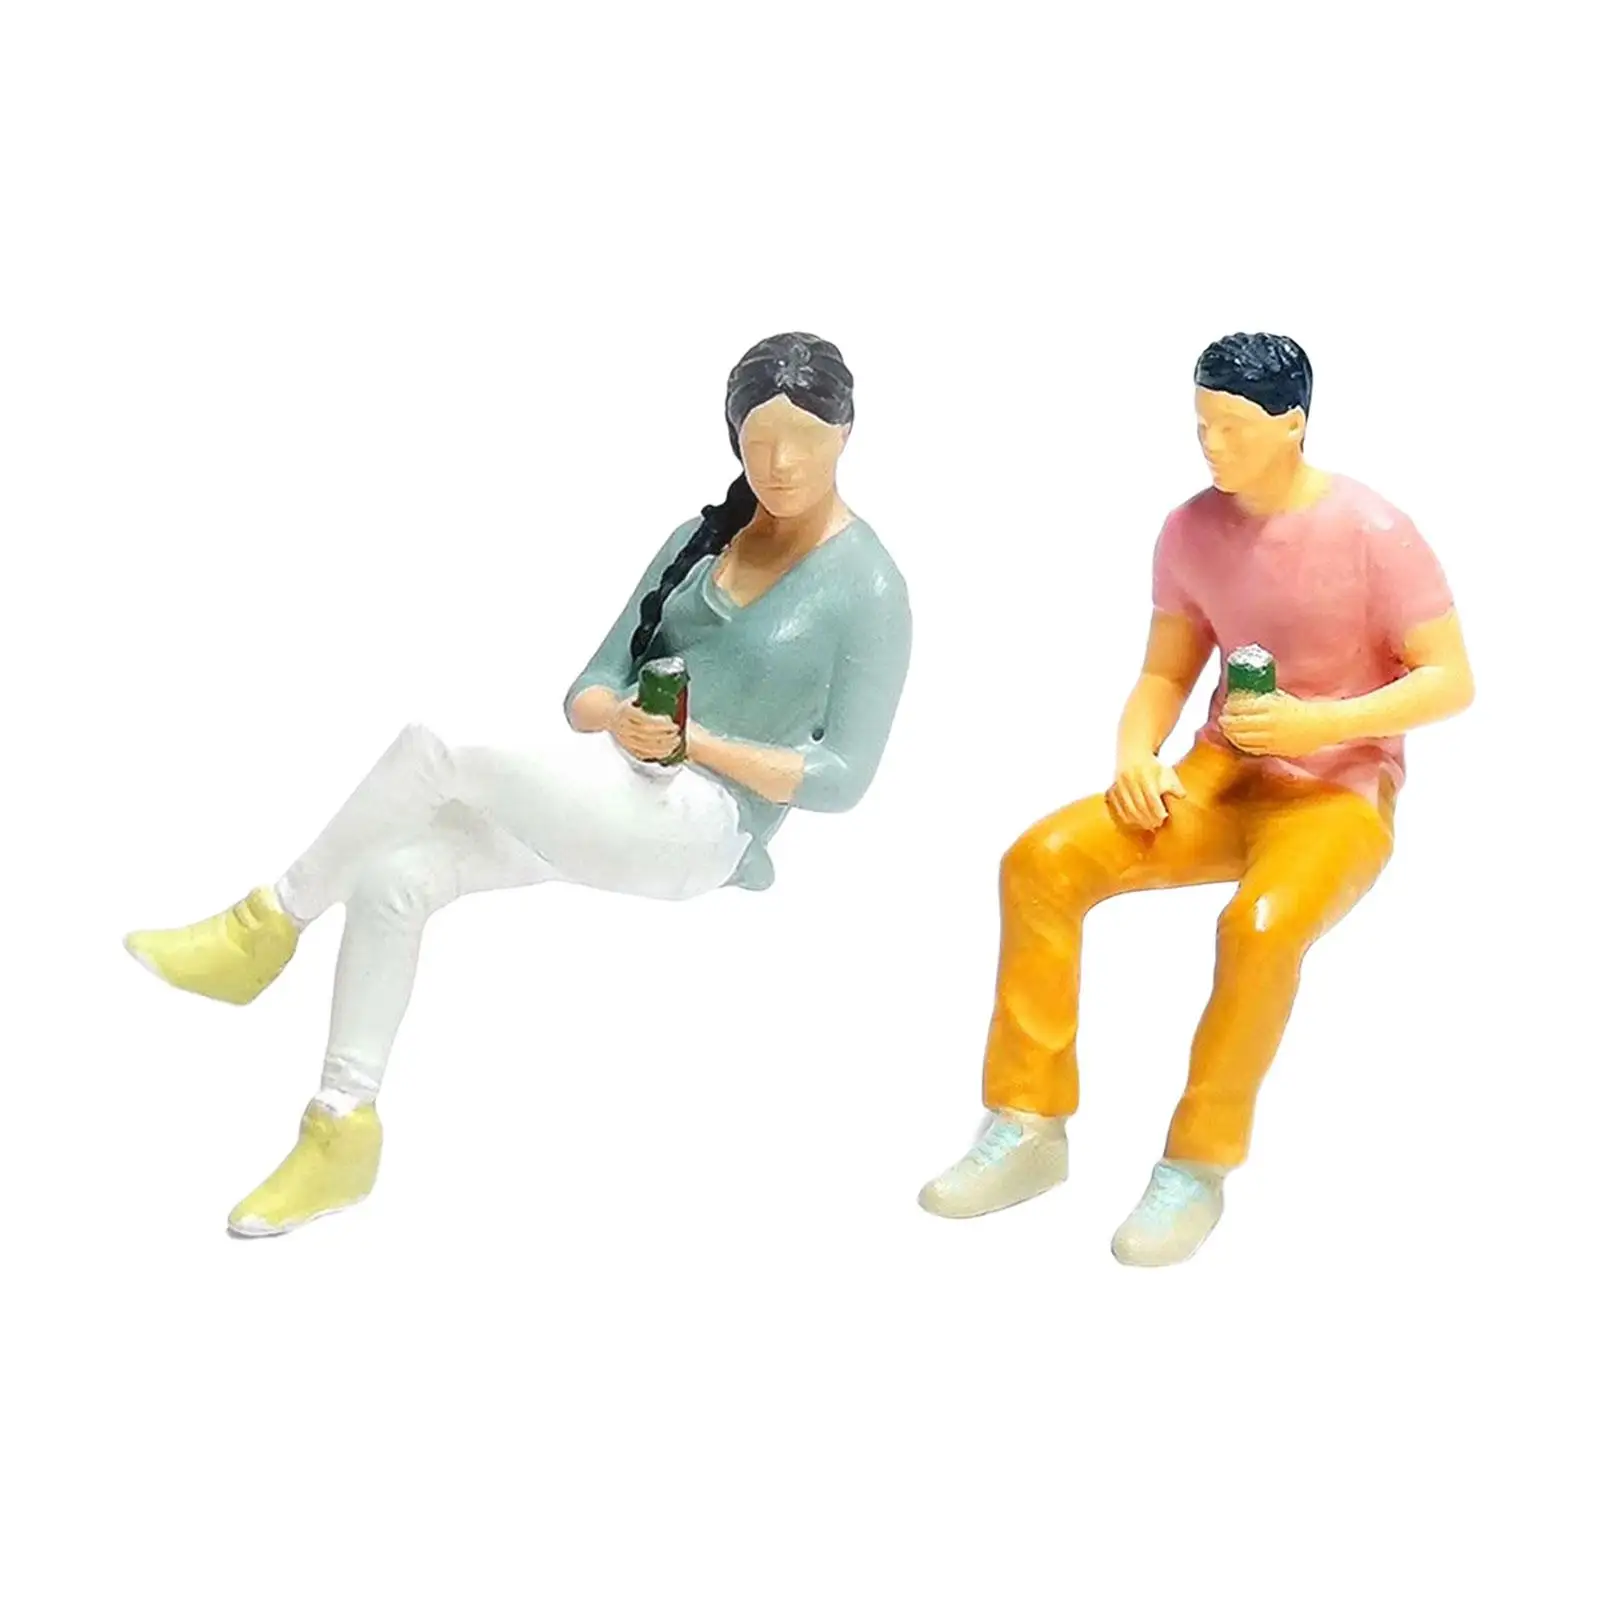 1:64 Drinking Figures Amazingly Detailed Resin Figures People Figures 1/64 Scale Figures Model for DIY Projects Scene Decoration